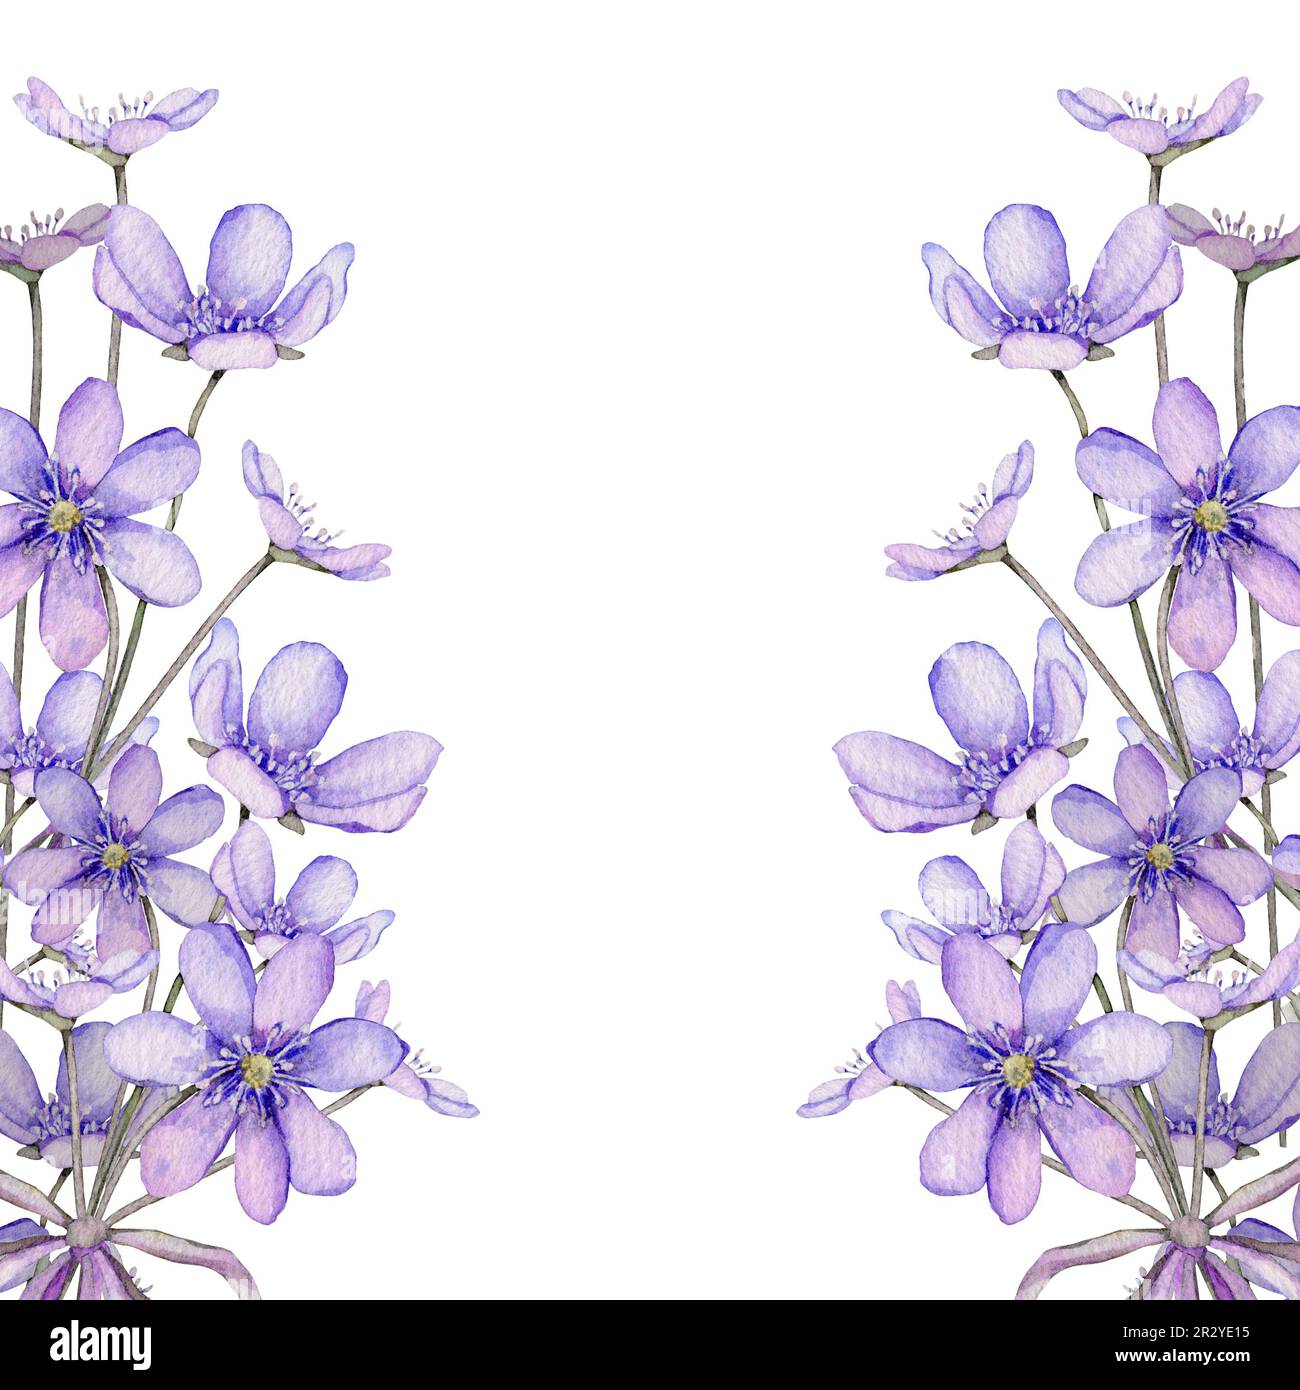 Watercolor spring flowers isolated on white background. Scilla. Coppice, hepatica - first spring flowers. Illustration of delicate lilac flowers Stock Photo